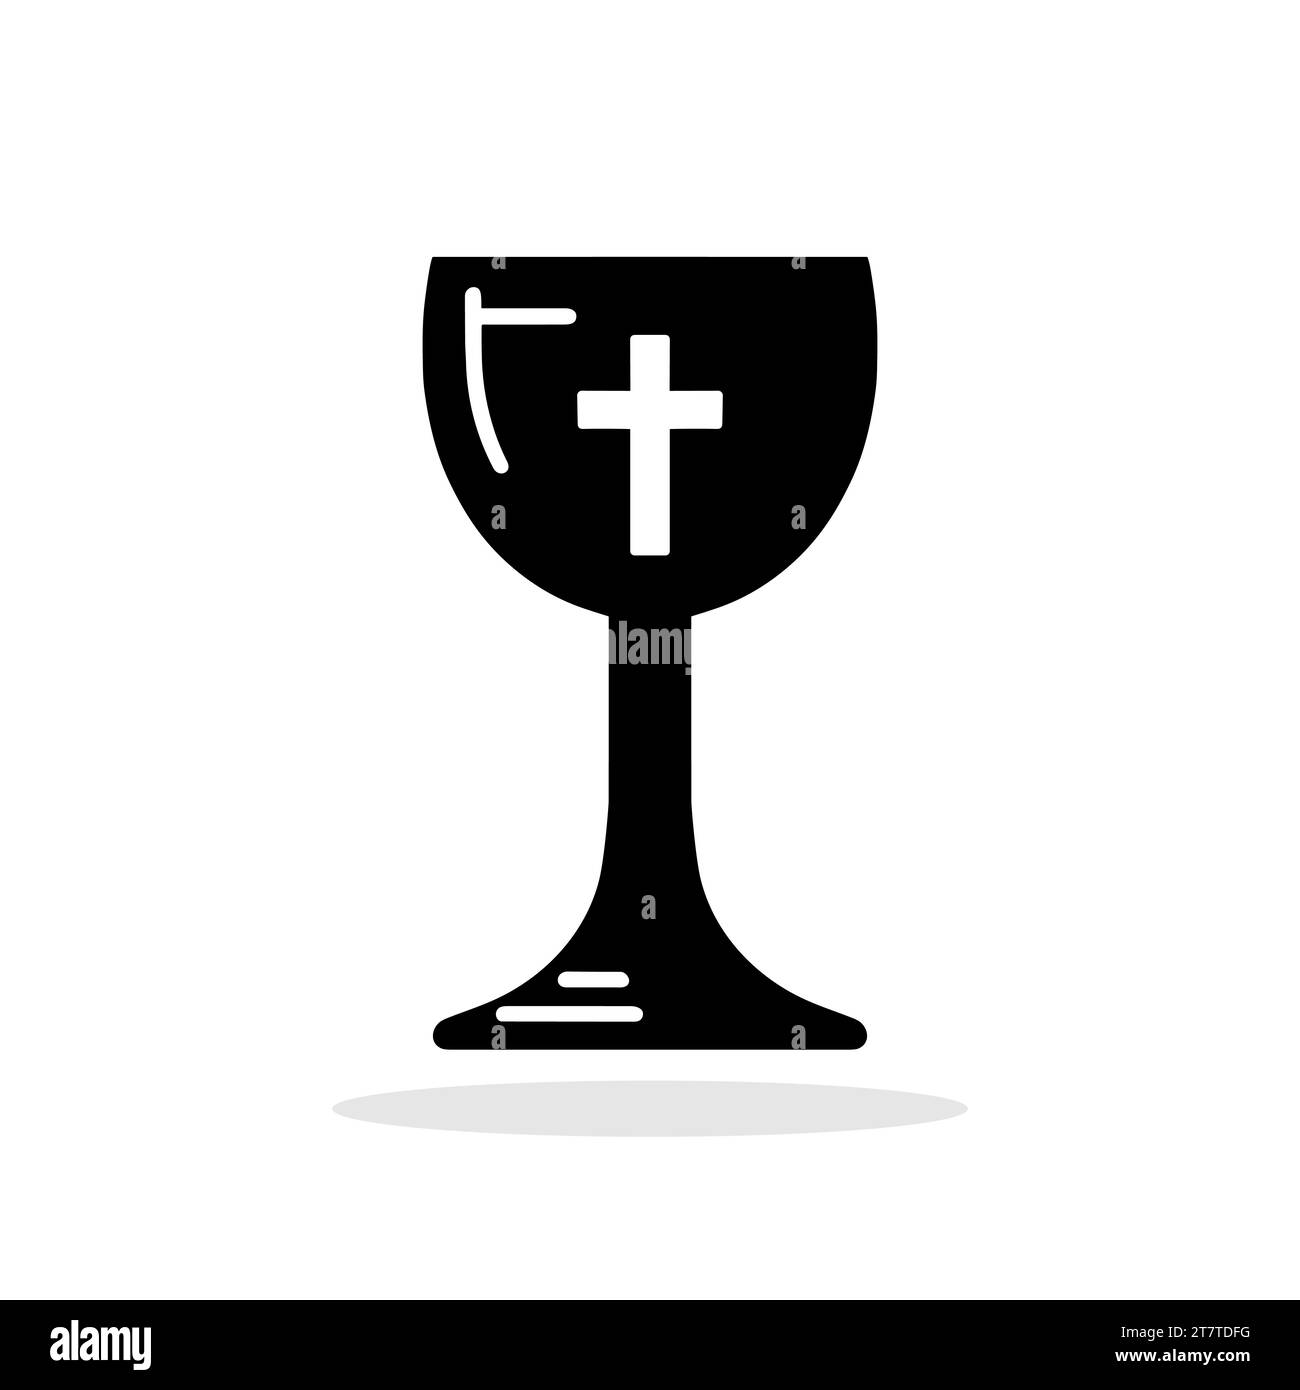 Christian chalice icon. Black icon of the Chalice with a cross. Christian fellowship concept. Religious icon. Vector illustration. Stock Vector